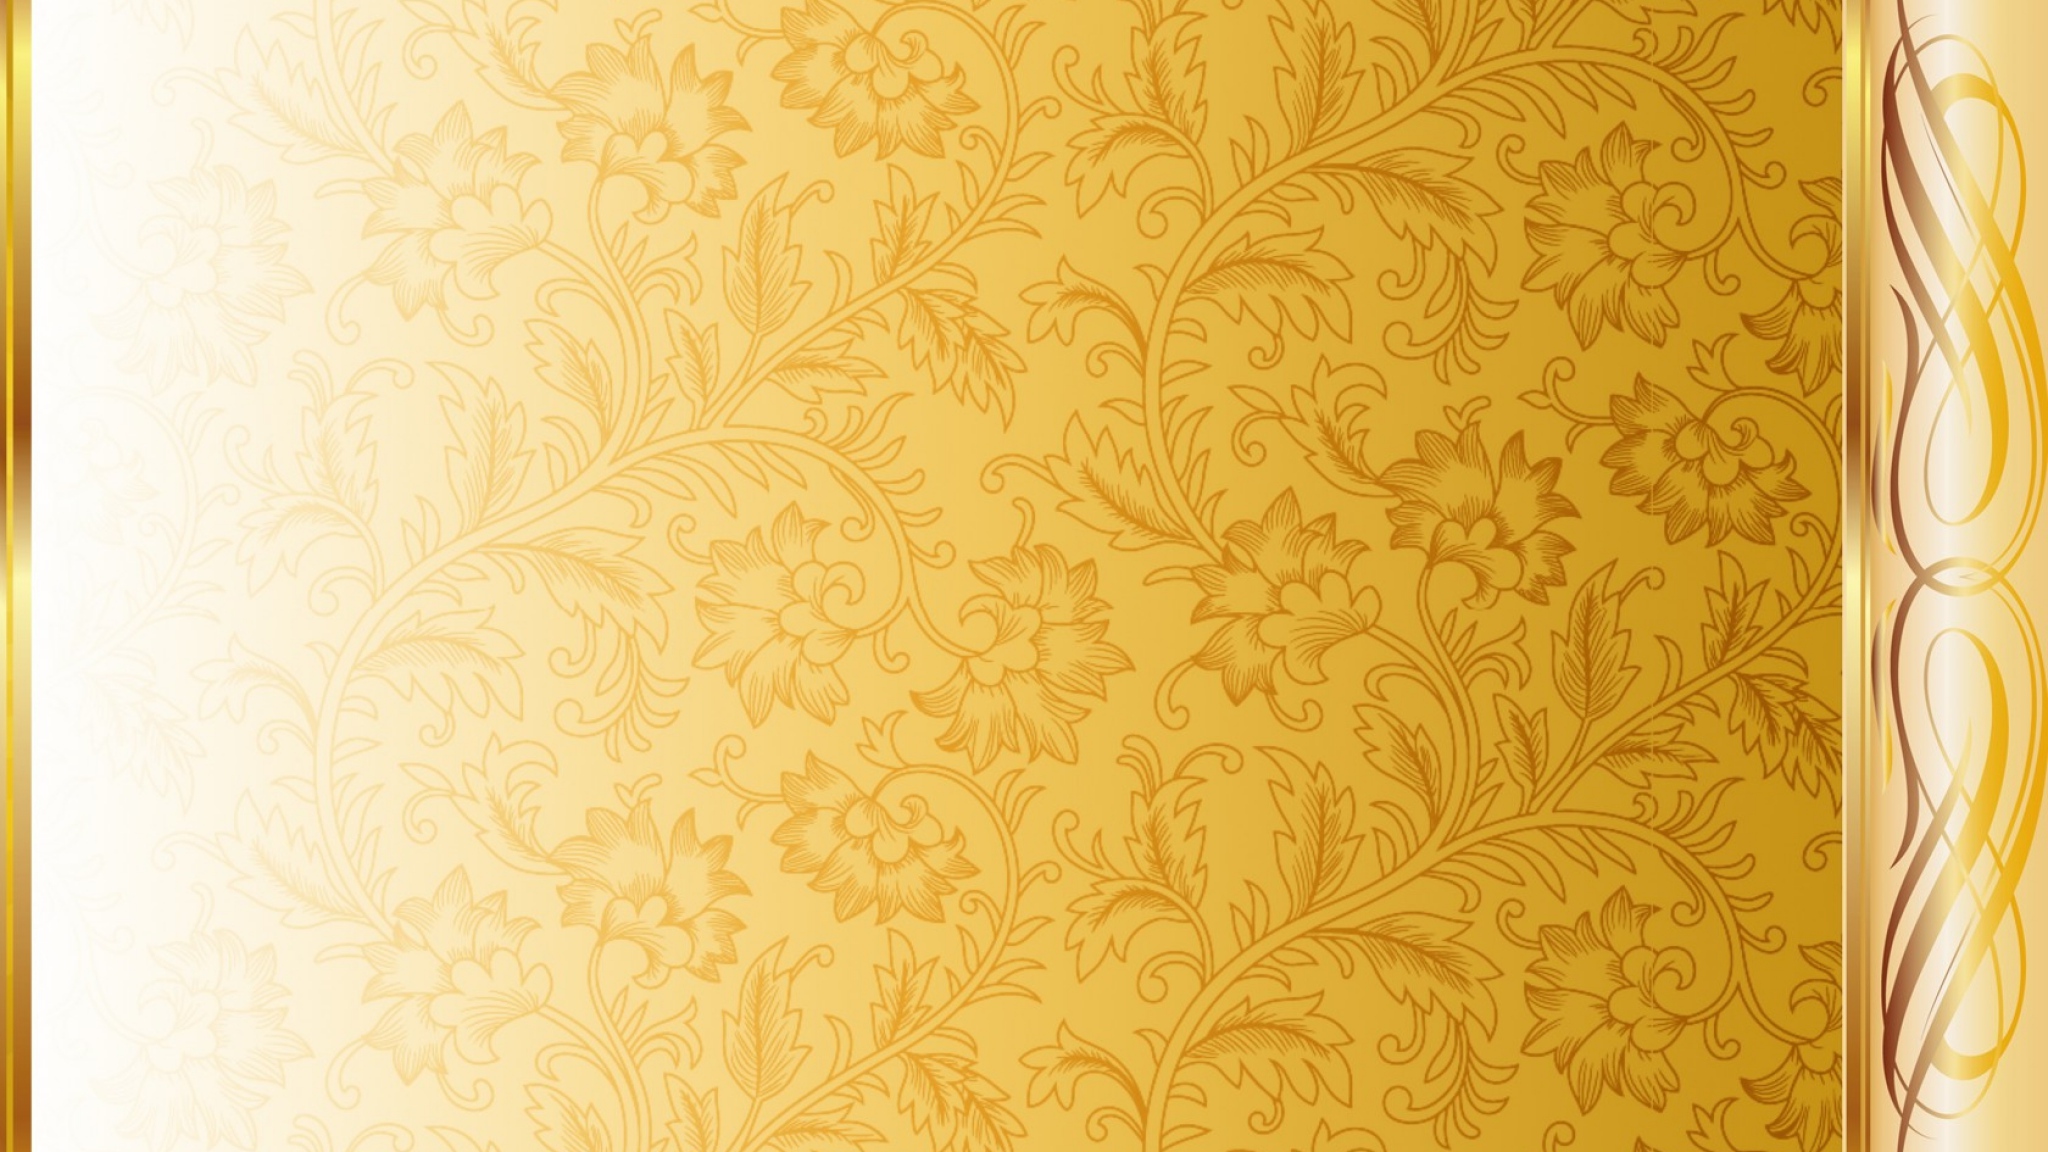 Gold and White Background - Bing images